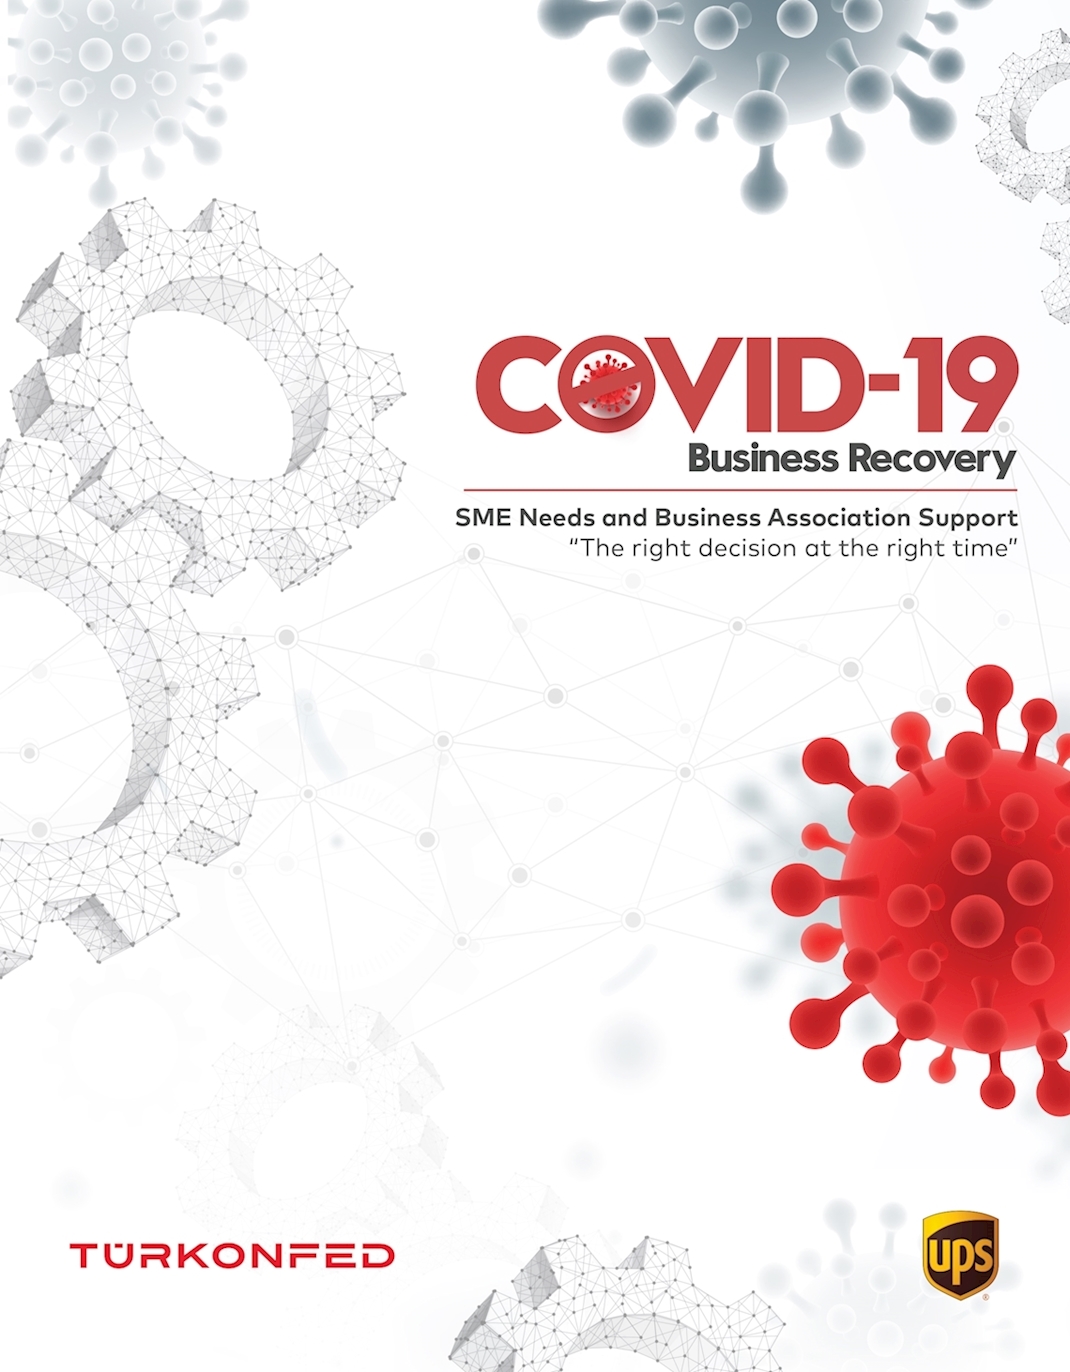 Covid-19 Business Recovery Report